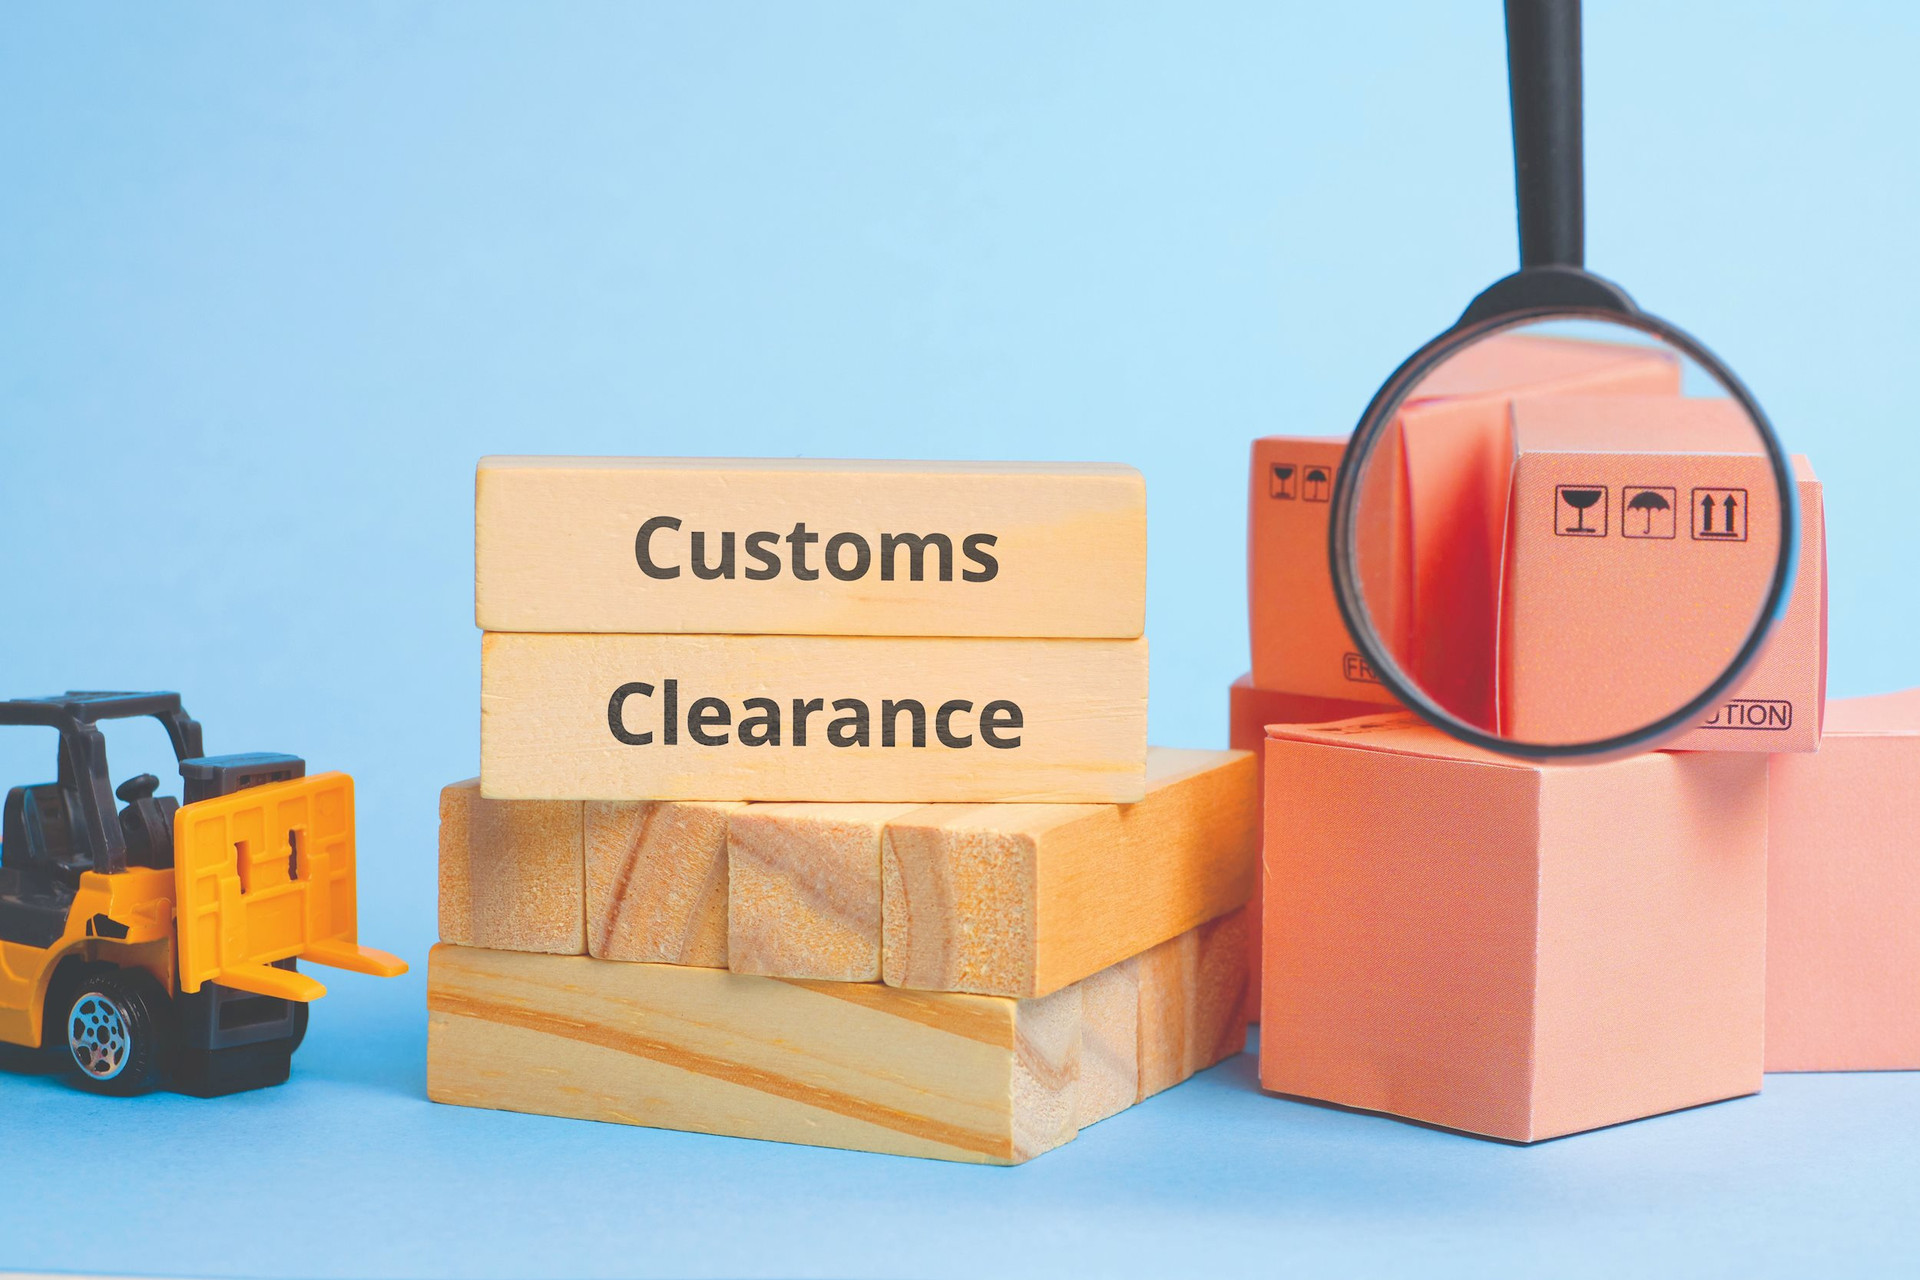 courier-industry-term-customs-clearance-clearance-cargo-border-upon-delivery-including-taxes-compressed.jpeg